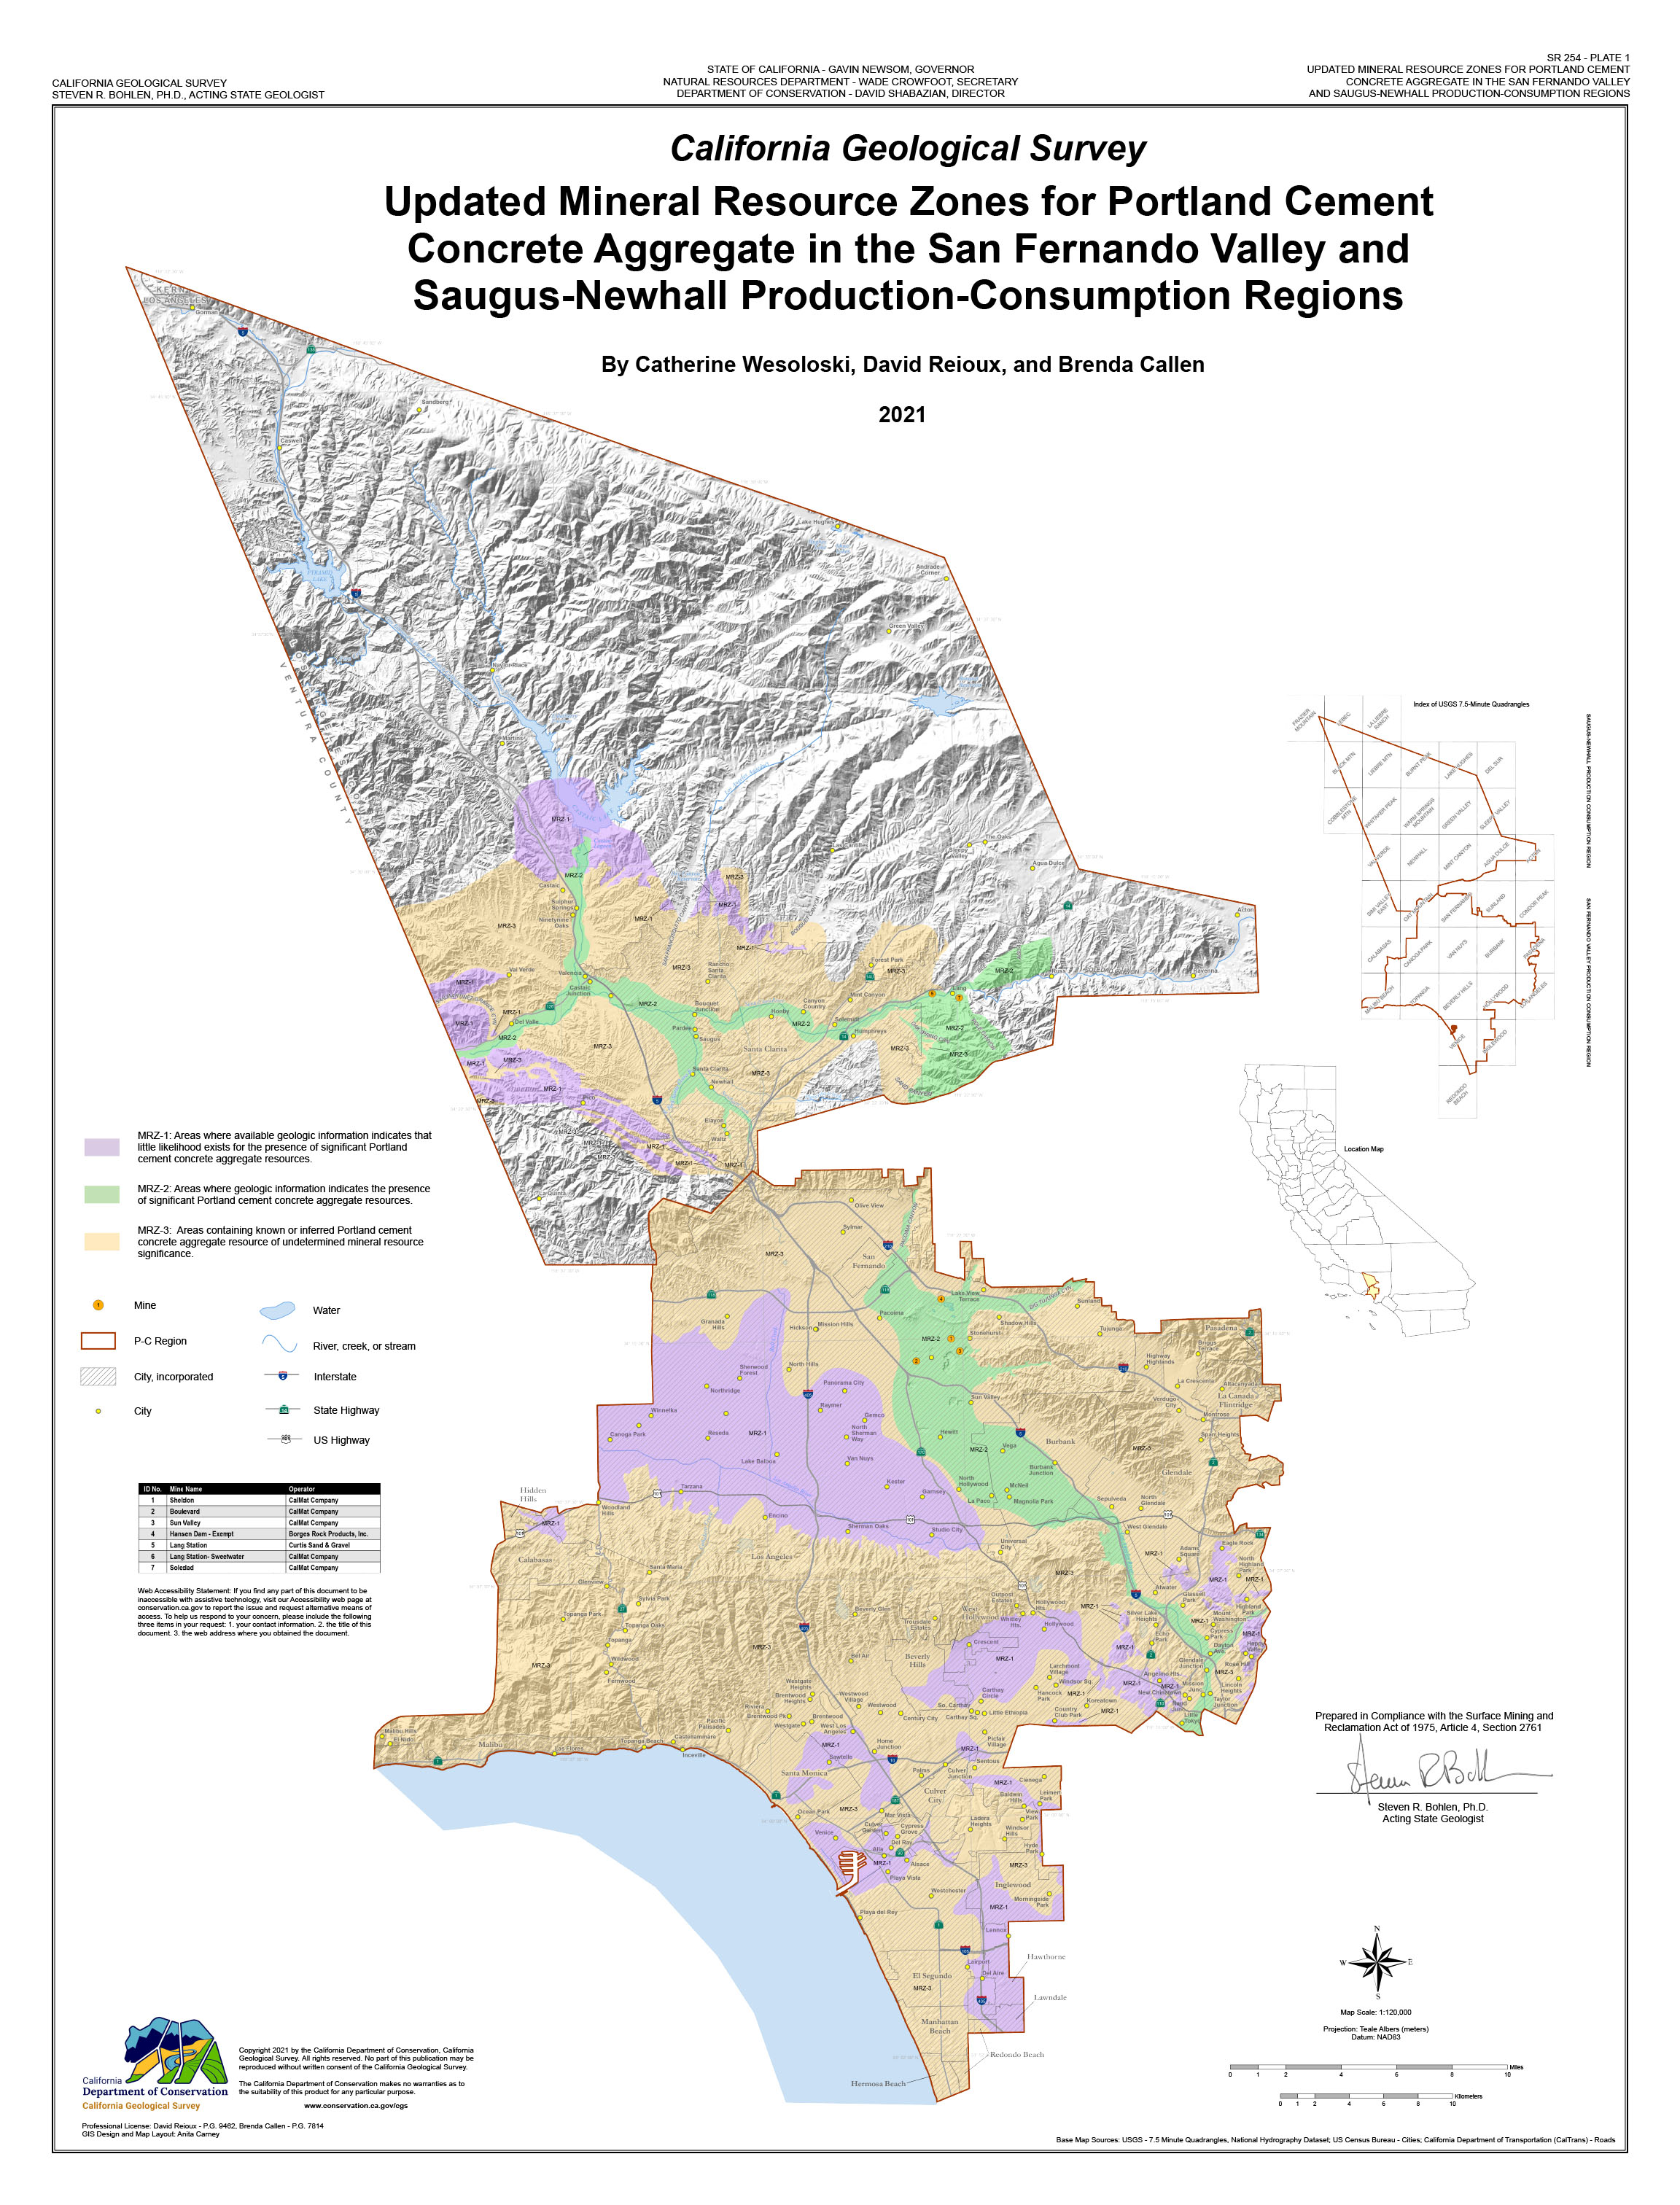 Preview of SR 254 Plate 1, map of San Fernando Valley and Saugus-Newhall Mineral Resource Zones.